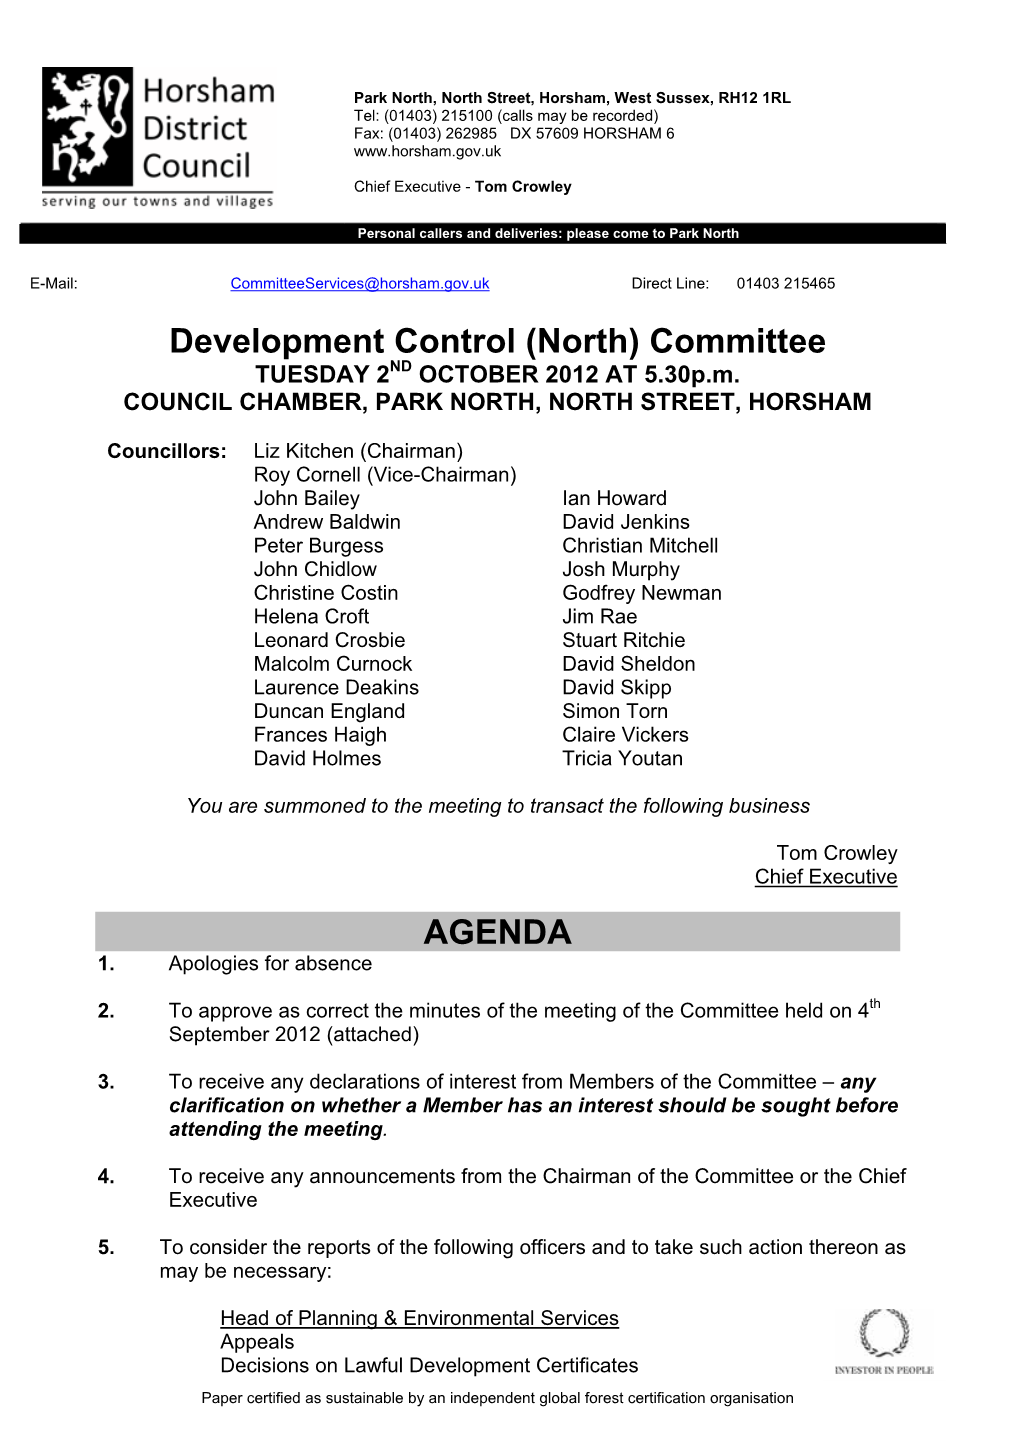 Development Control (North) Committee TUESDAY 2ND OCTOBER 2012 at 5.30P.M